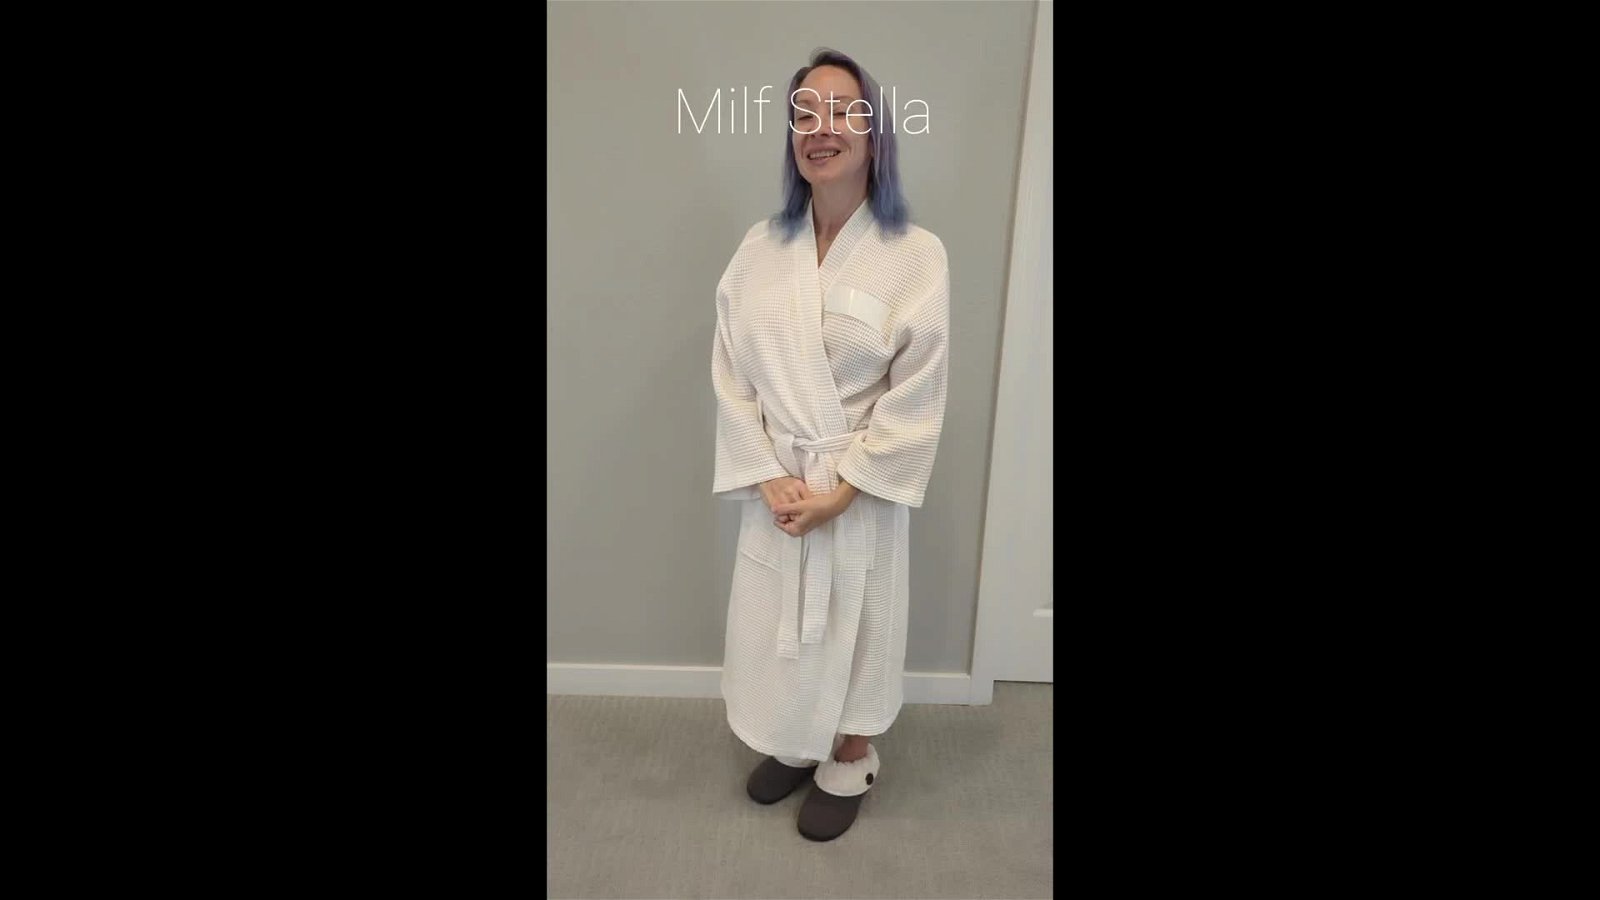 Video post by SexWithMilfStella